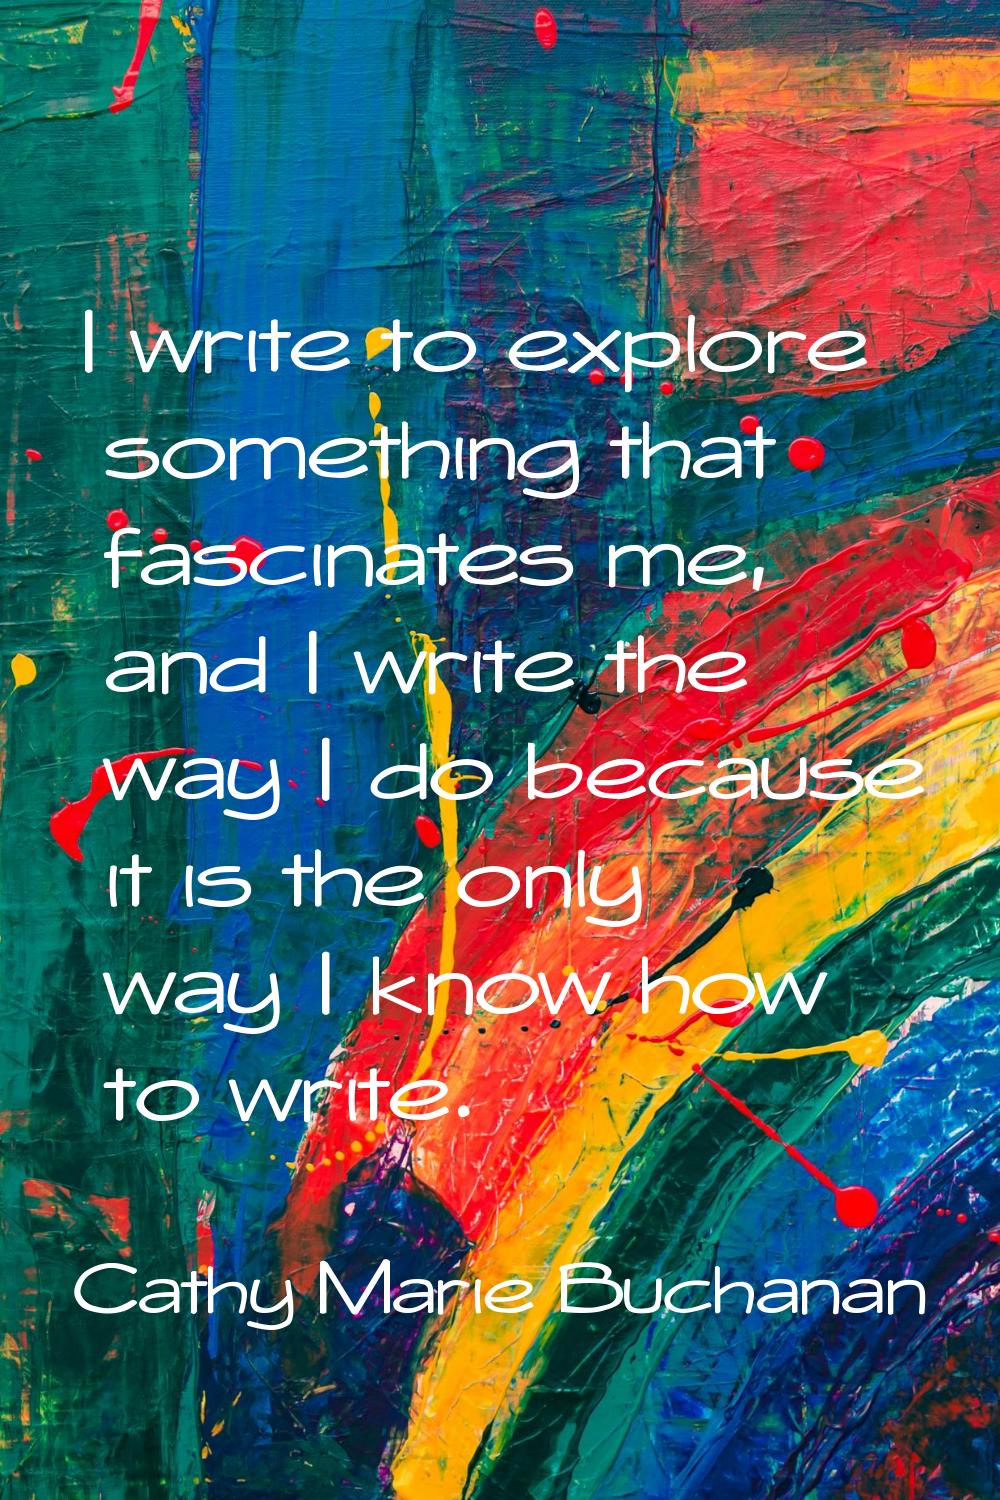 I write to explore something that fascinates me, and I write the way I do because it is the only wa